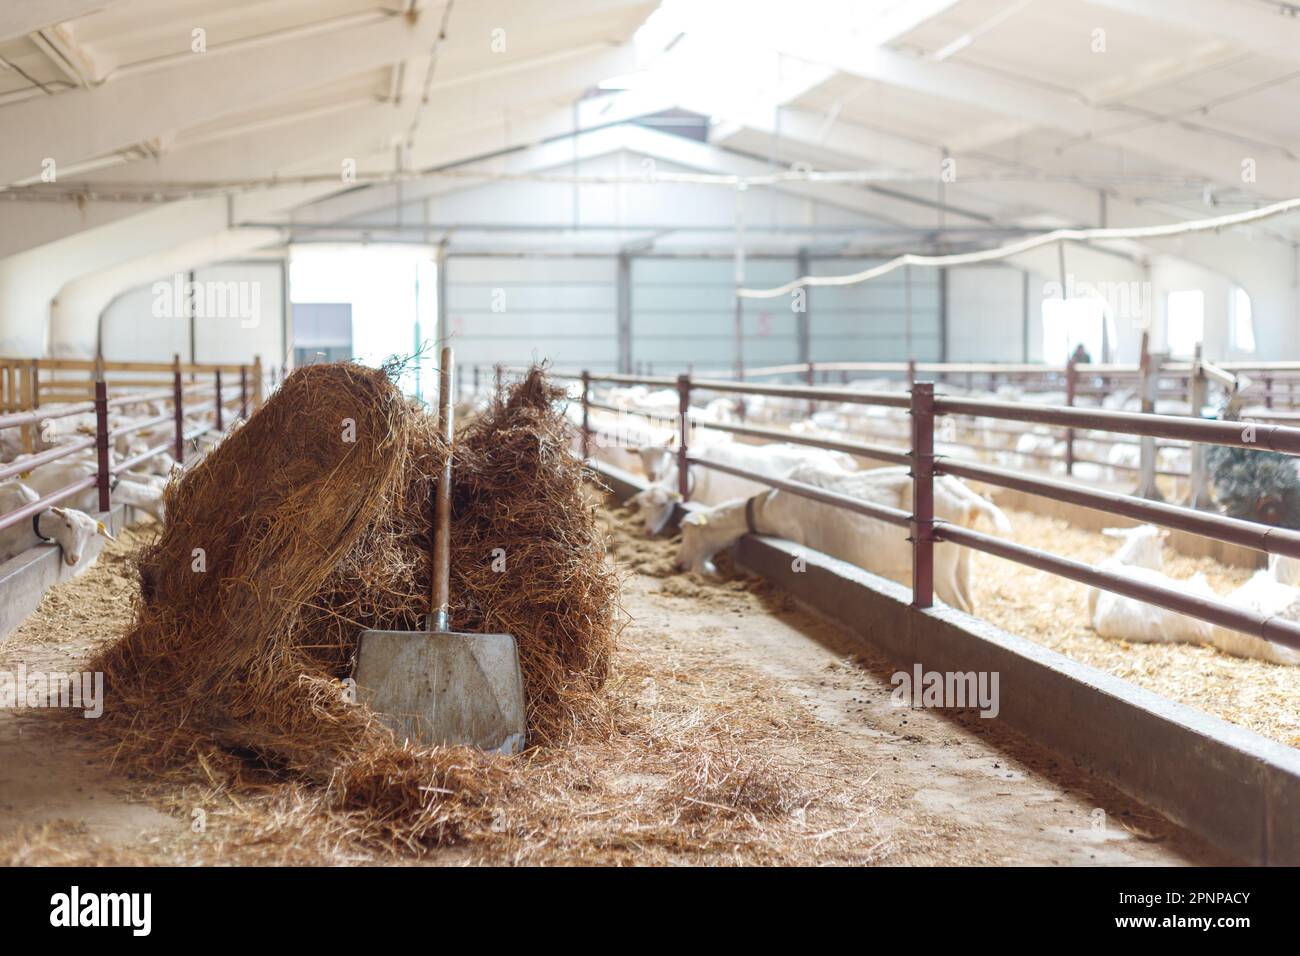 Dry hay Stack in Large Stock Barn Interior Stock Photo